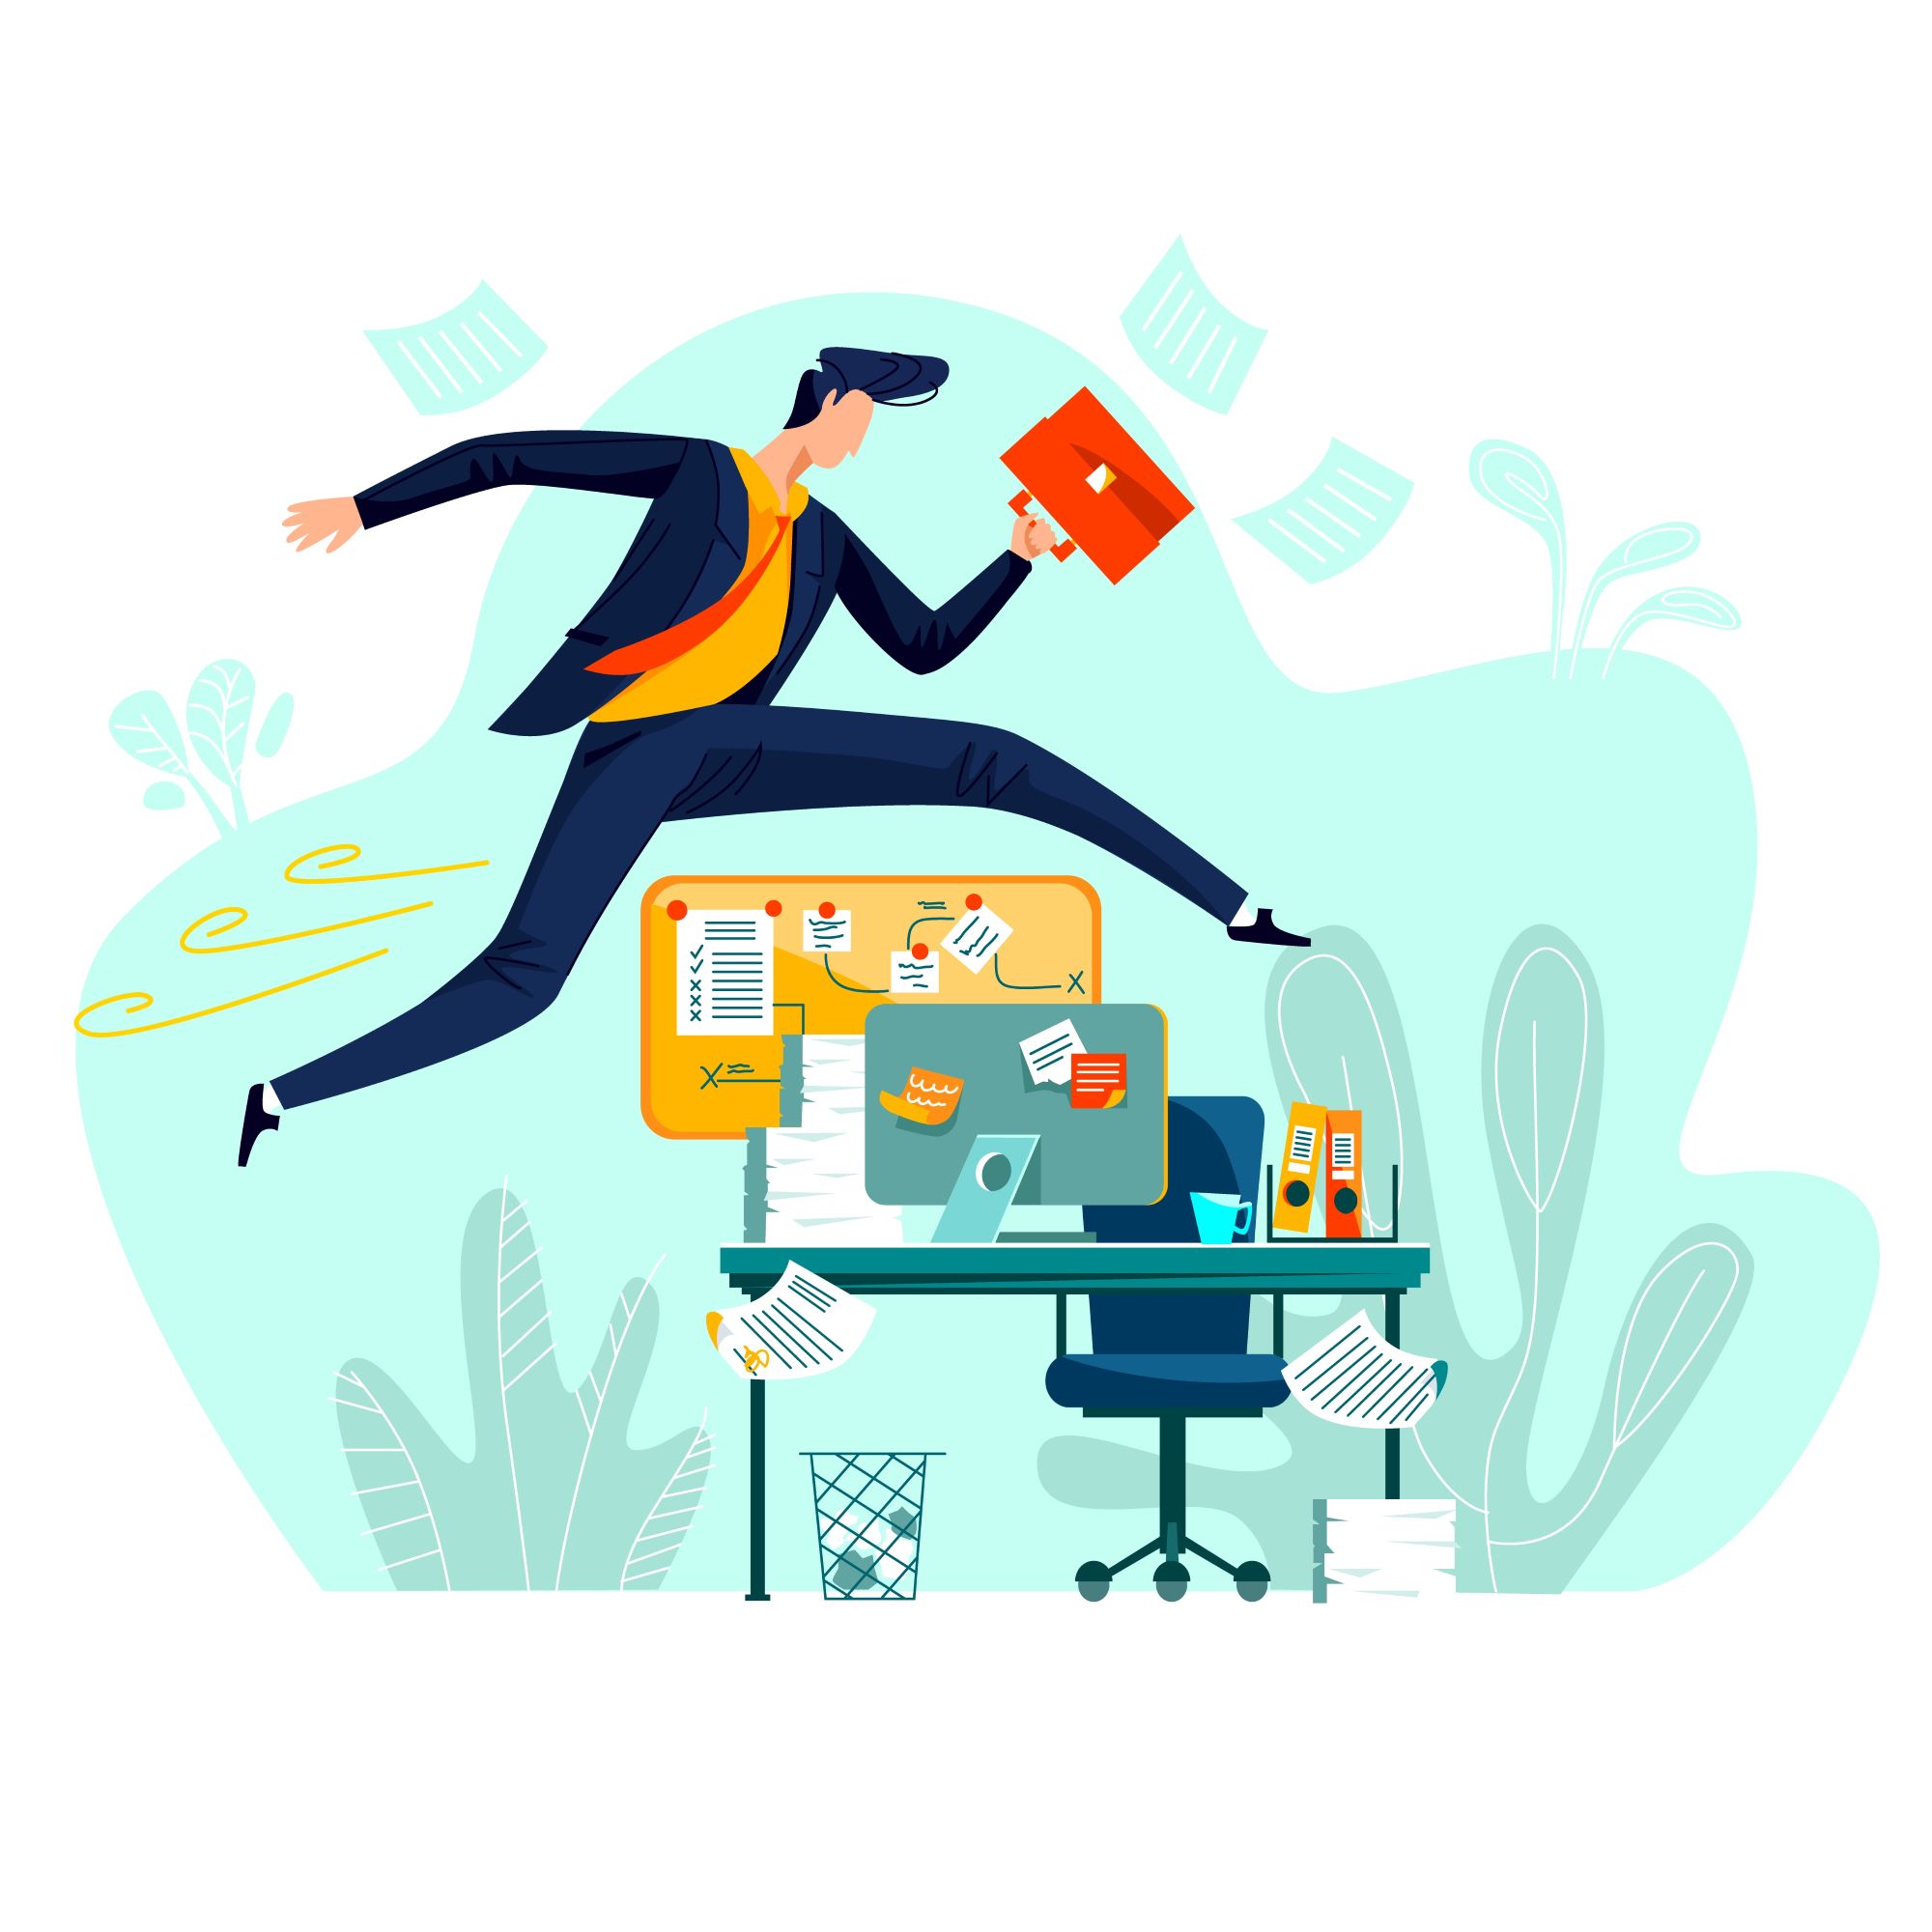 Illustration of a business man holding a briefcase leaping over an office desk